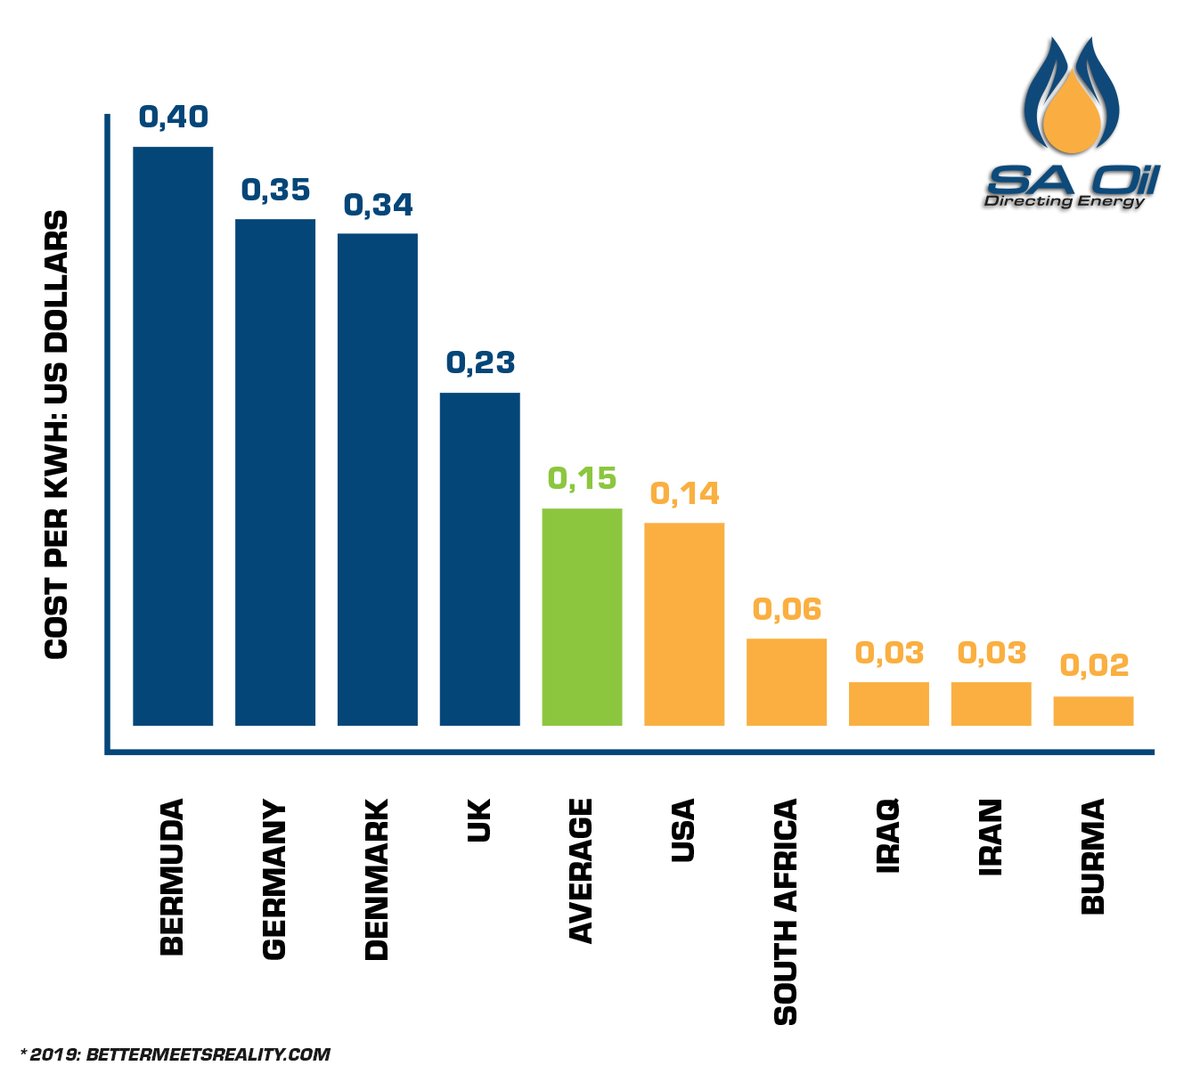 WHO PAYS WHAT? Electricity prices vary widely from country to country, and depend on fuel source, infrastructure, geography and taxes. #Eskom #Power #Electricity #Economy #GetOffThGrid #SouthAfrica